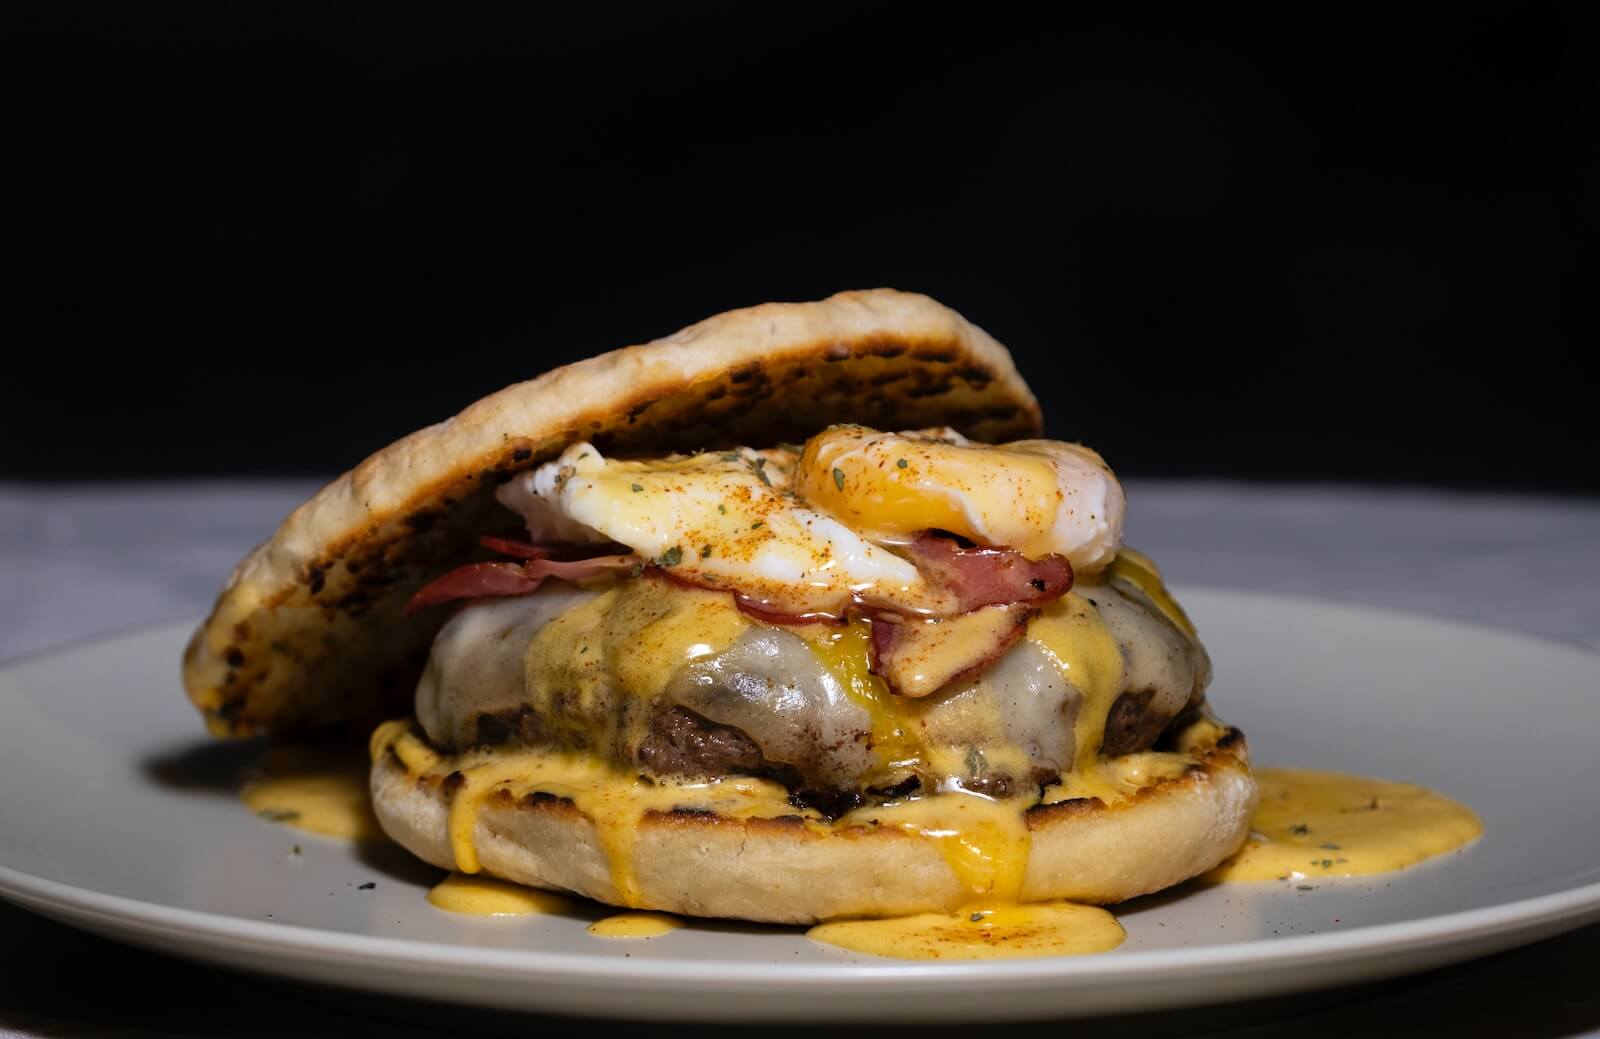 A breakfast sandwich with an English muffin